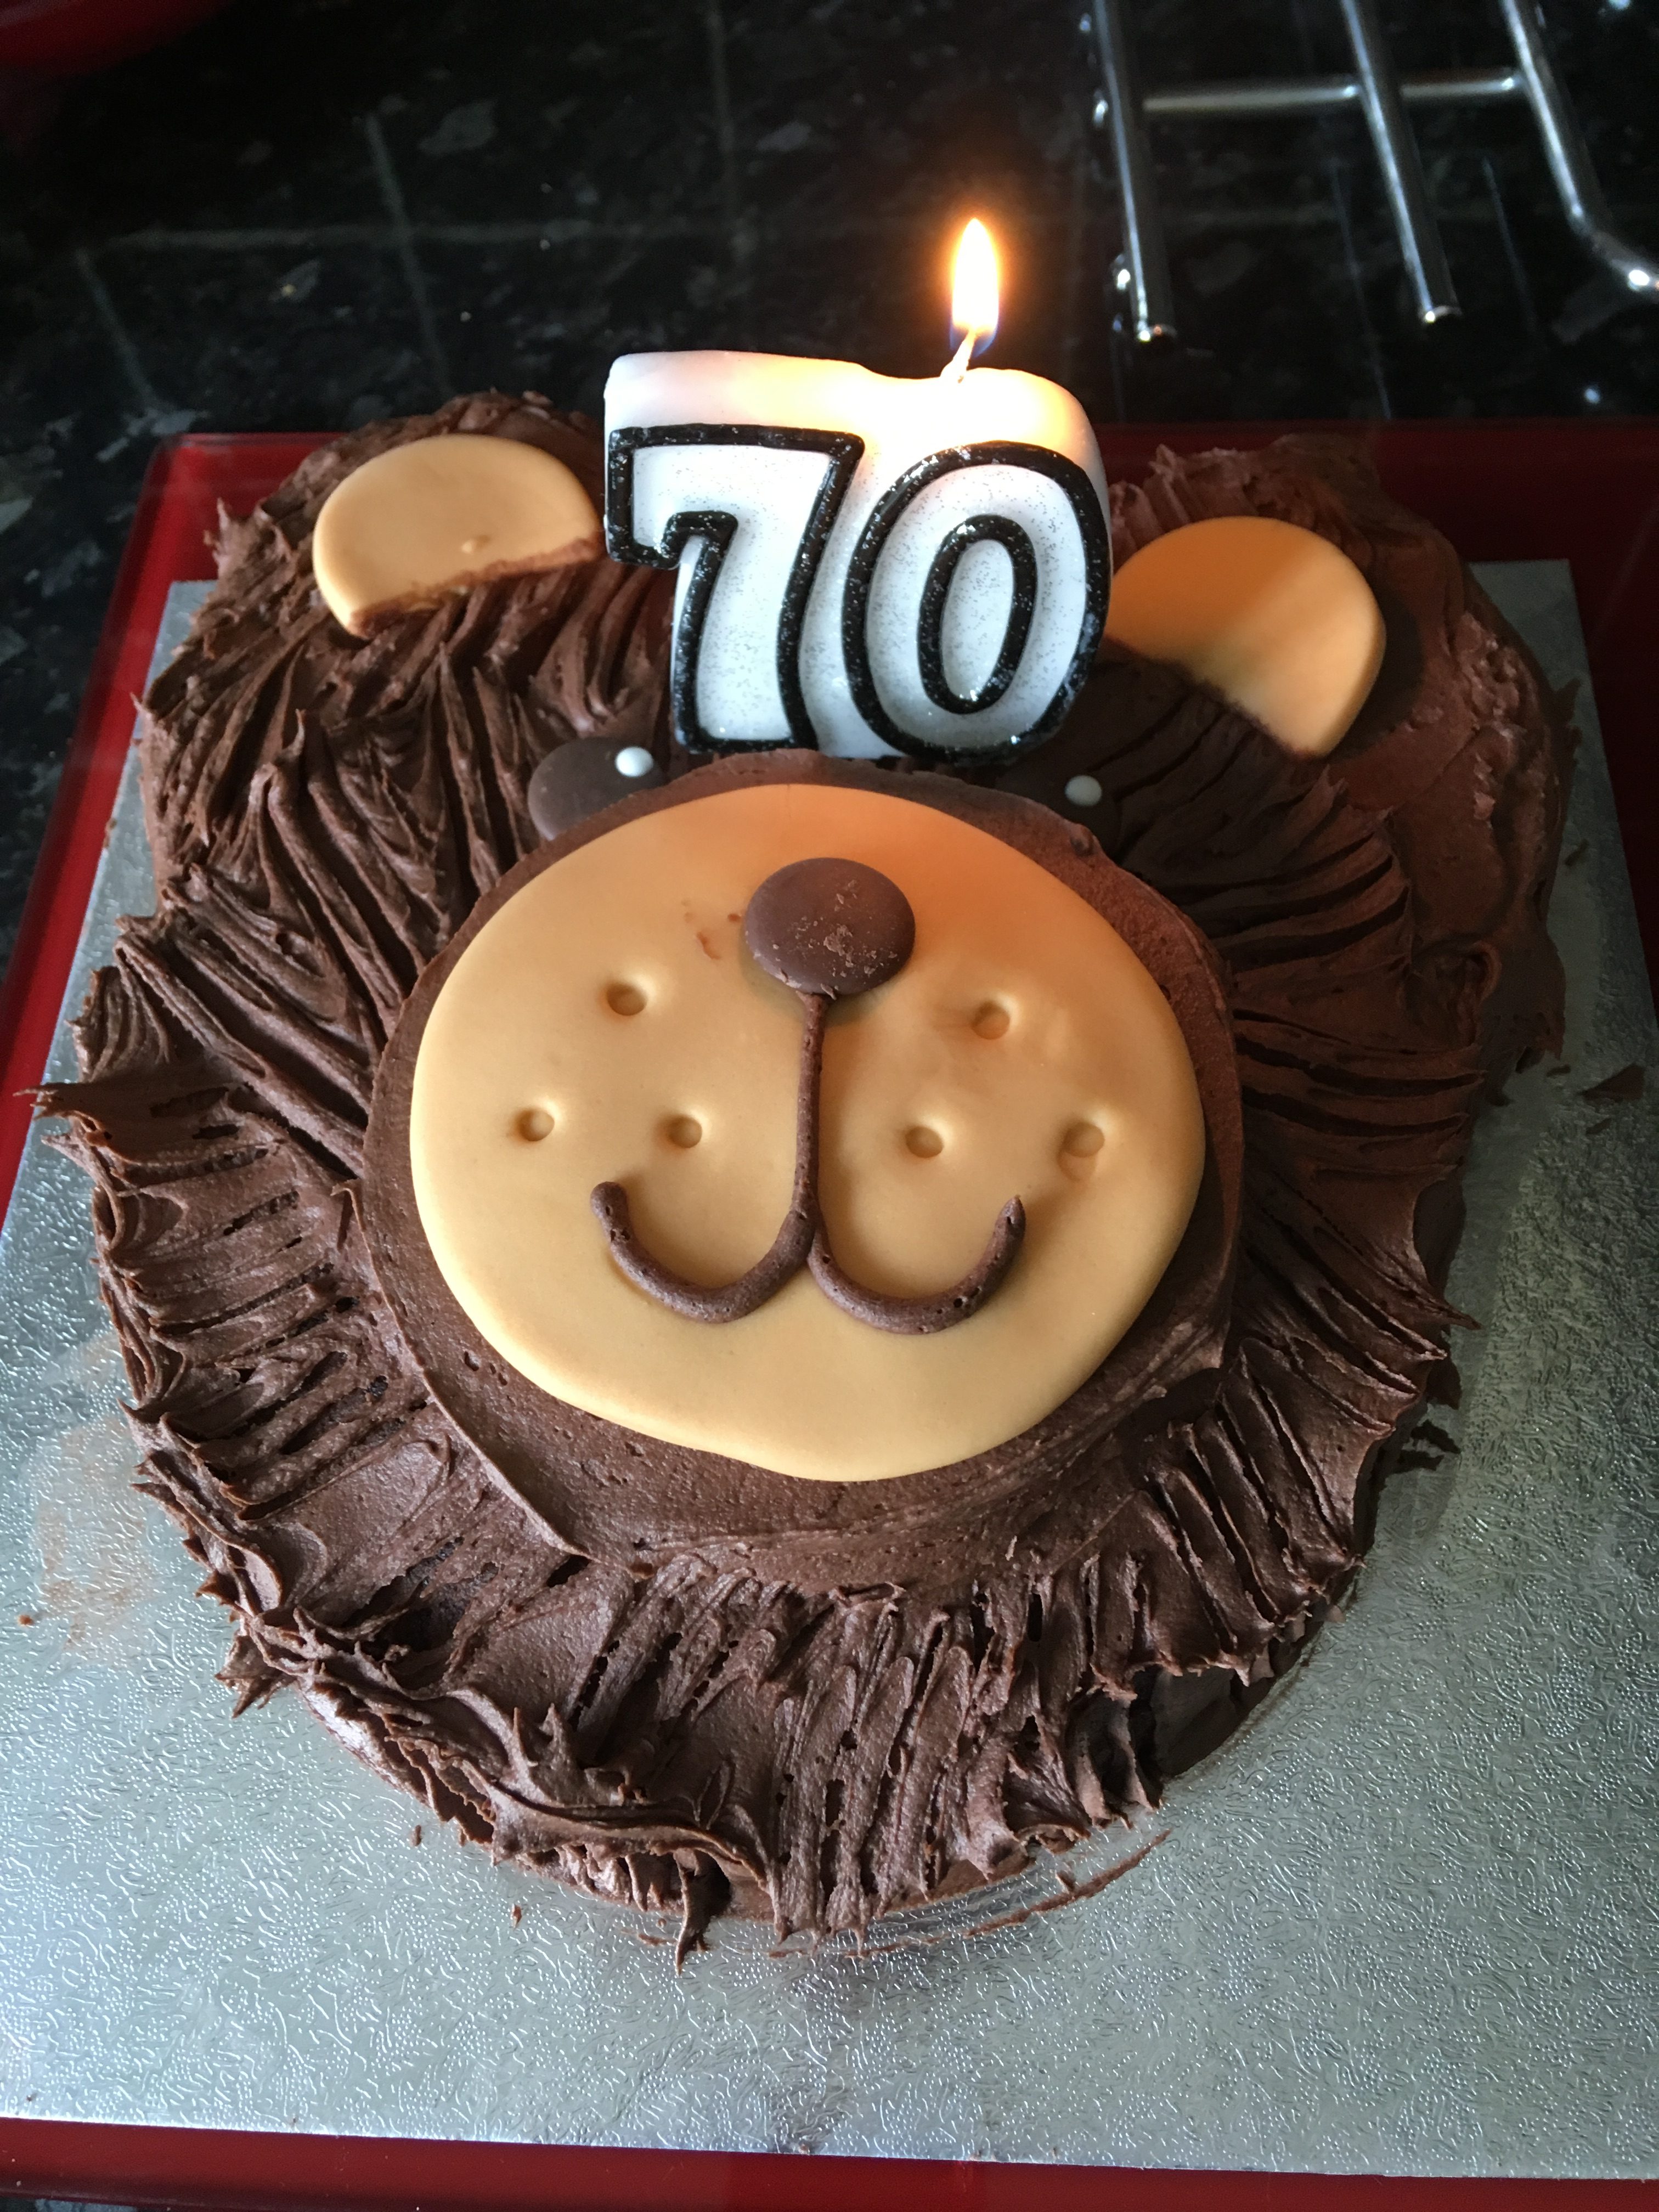 The 70th Birthday Cake I bought my mum; it's a bear's face with lots of thick icing.